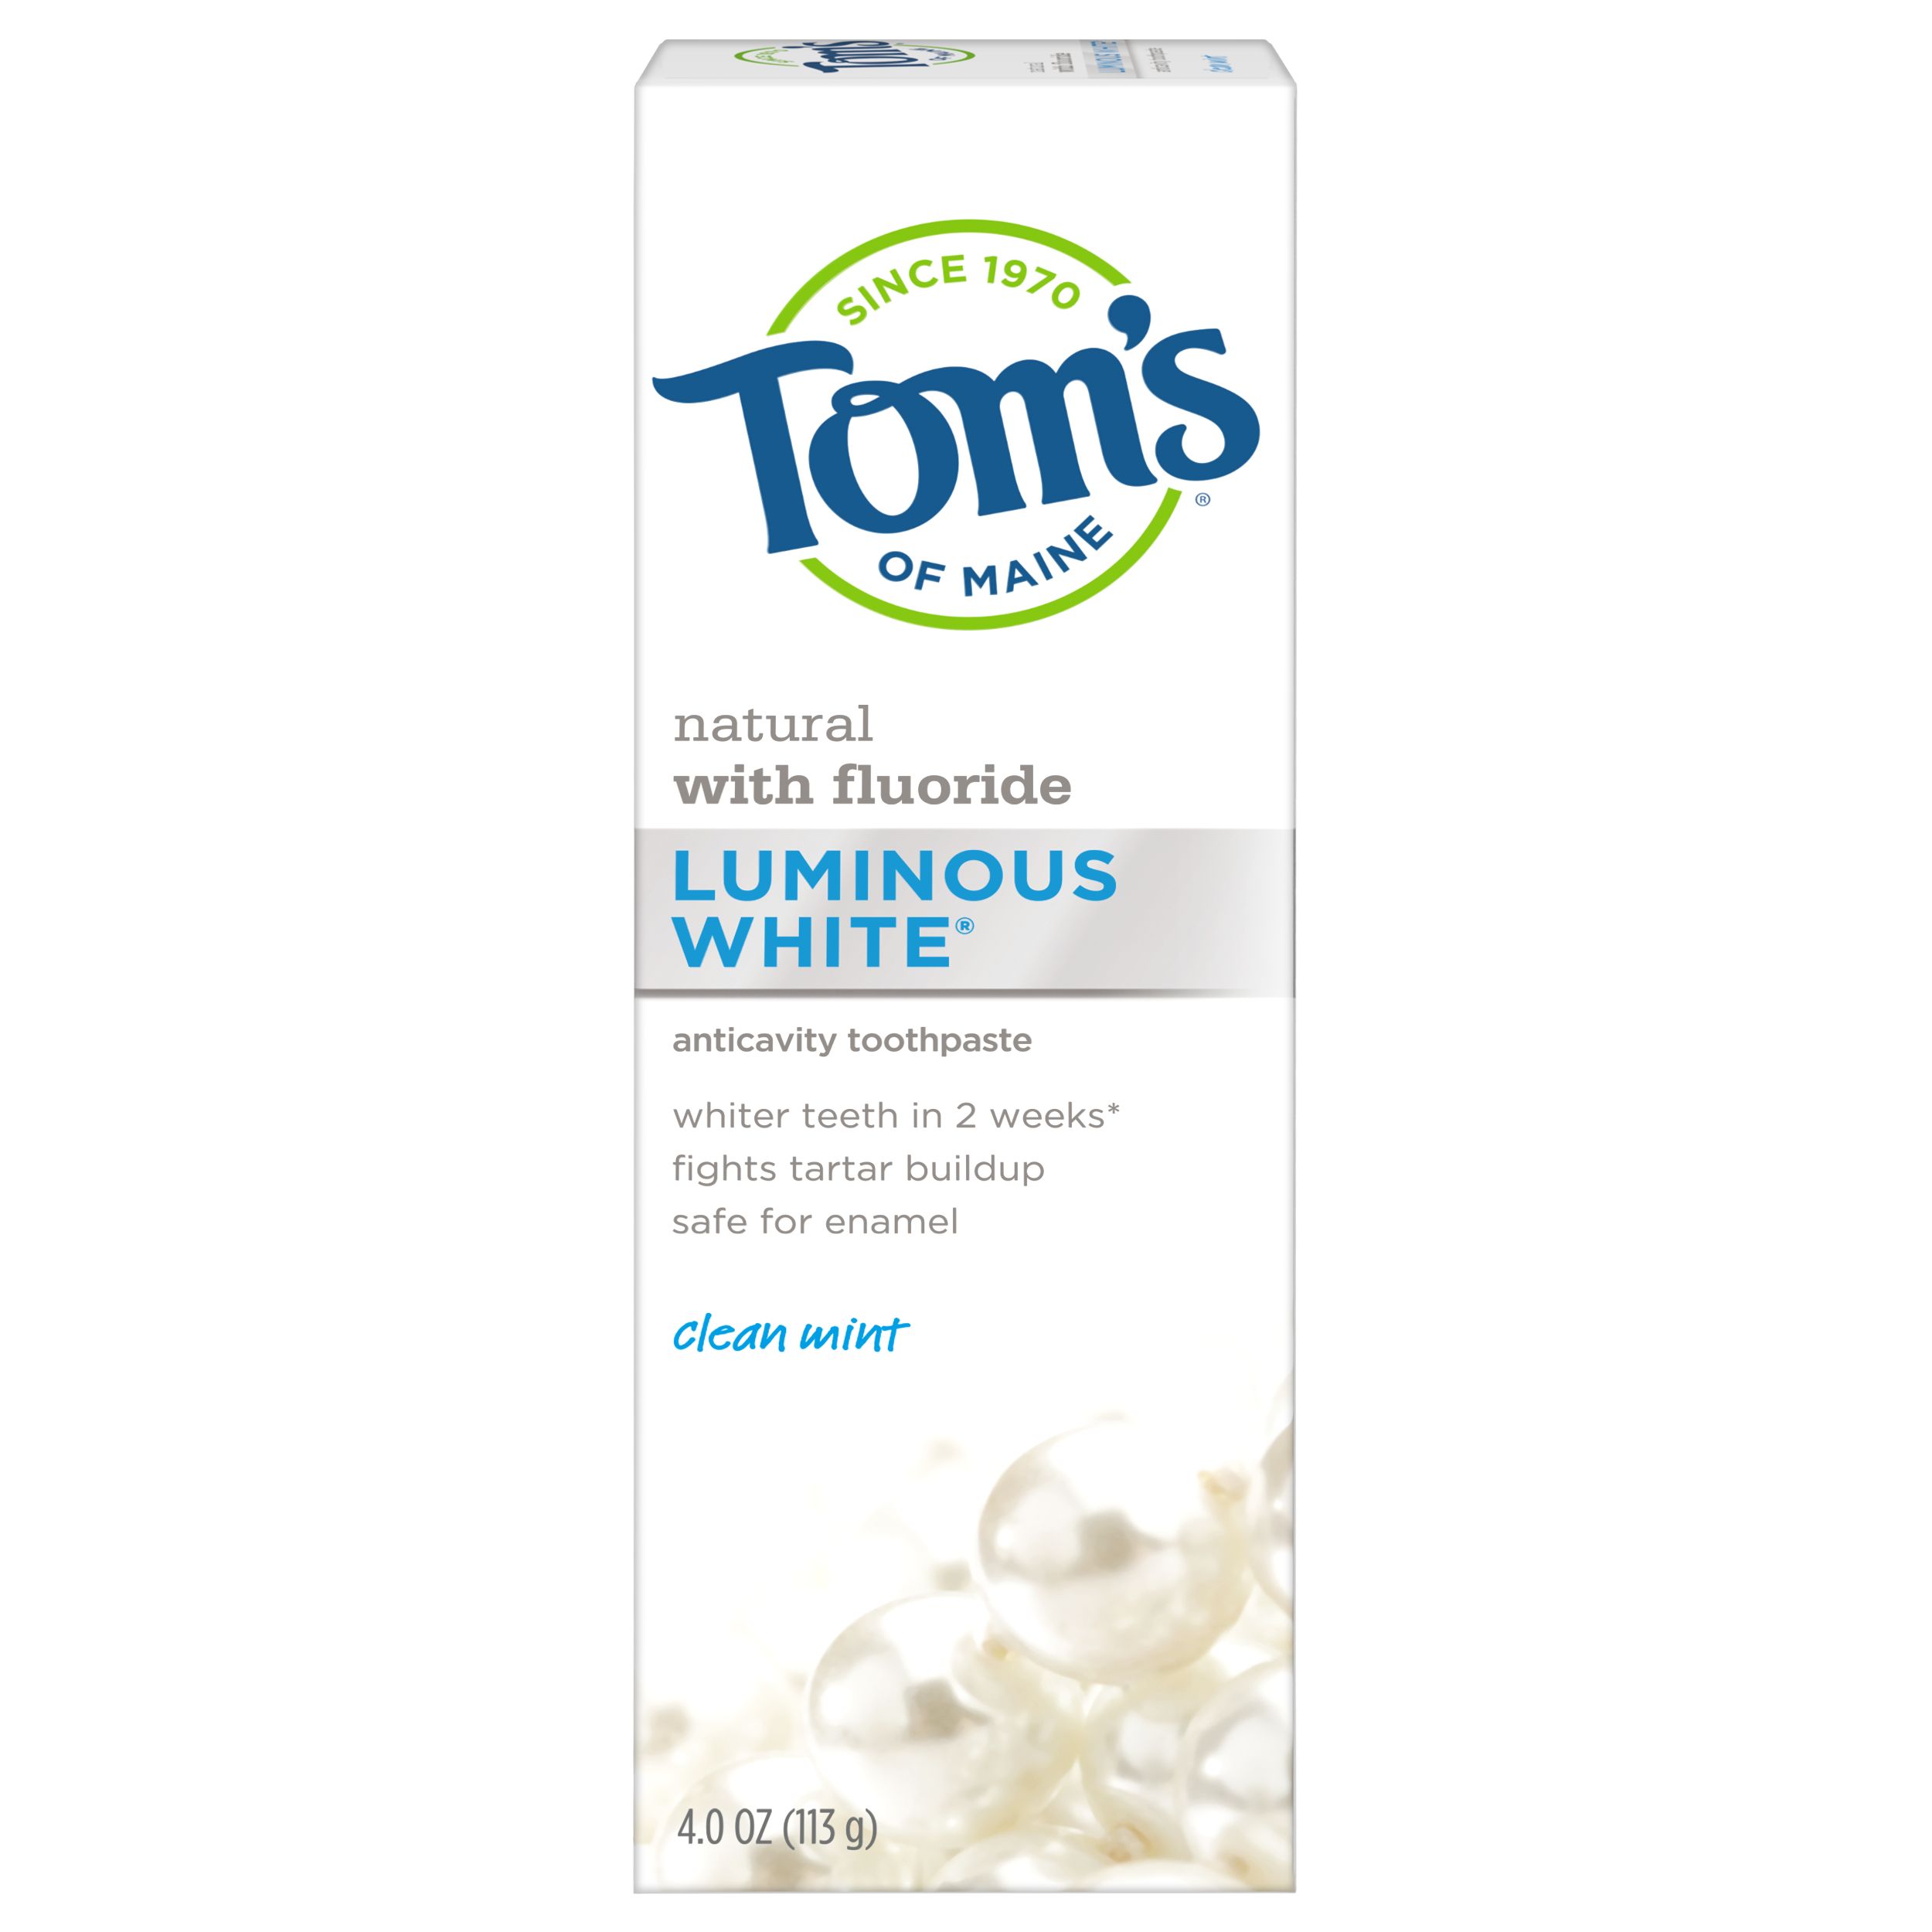 Tom's of Maine Luminous White Anticavity Natural Toothpaste, Clean Mint, 4.0oz - image 1 of 7